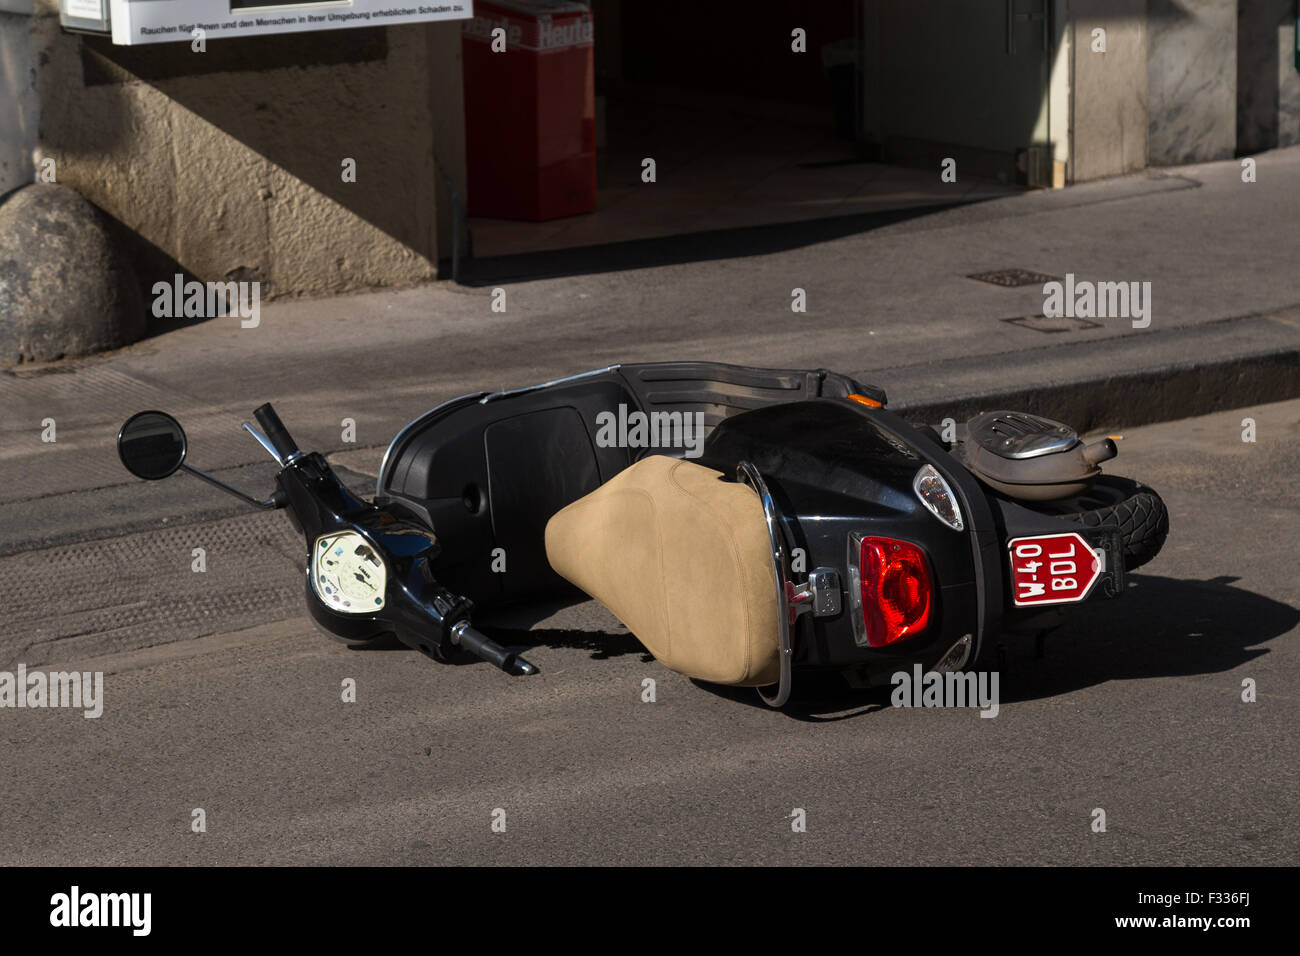 VIENNA, AUSTRIA - 8TH AUGUST 2015: A parked scooter which has been knocked over on a street in Vienna. Stock Photo